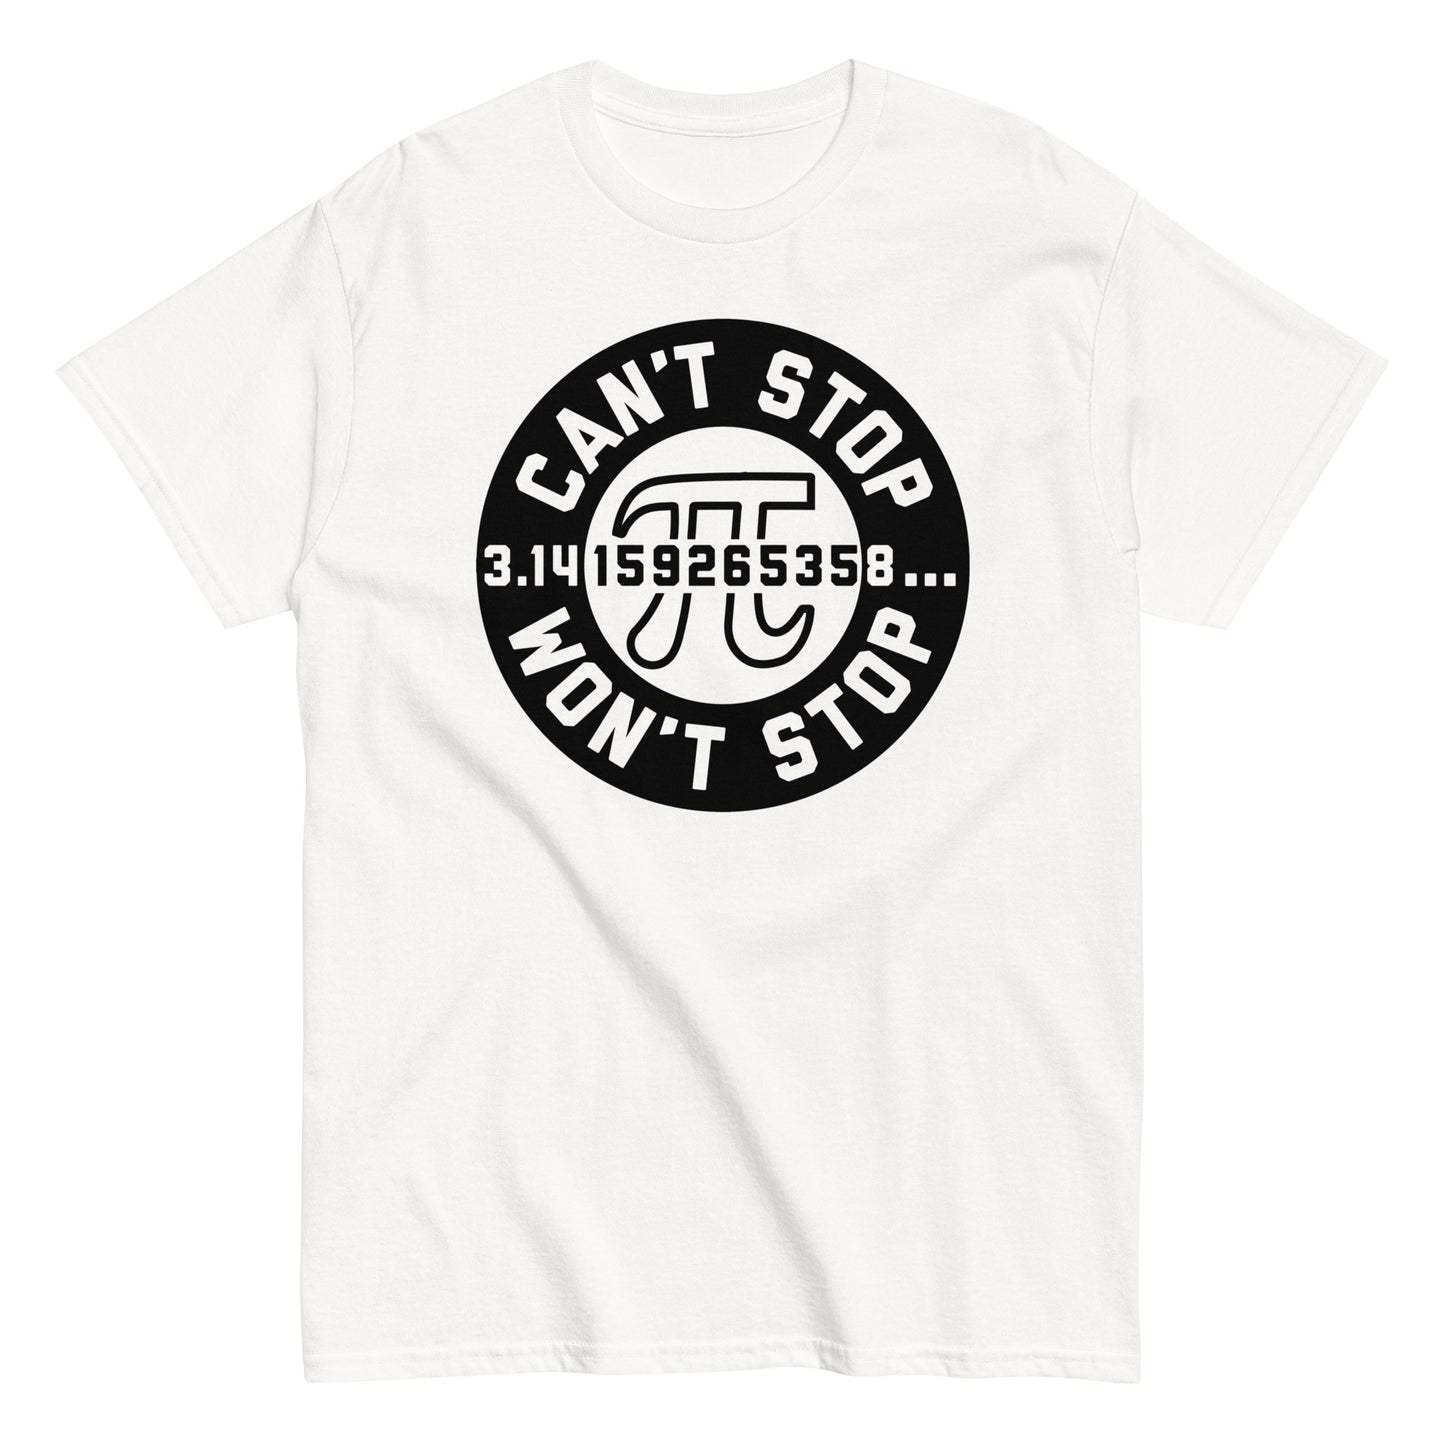 Can't Stop Won't Stop Men's Classic Tee